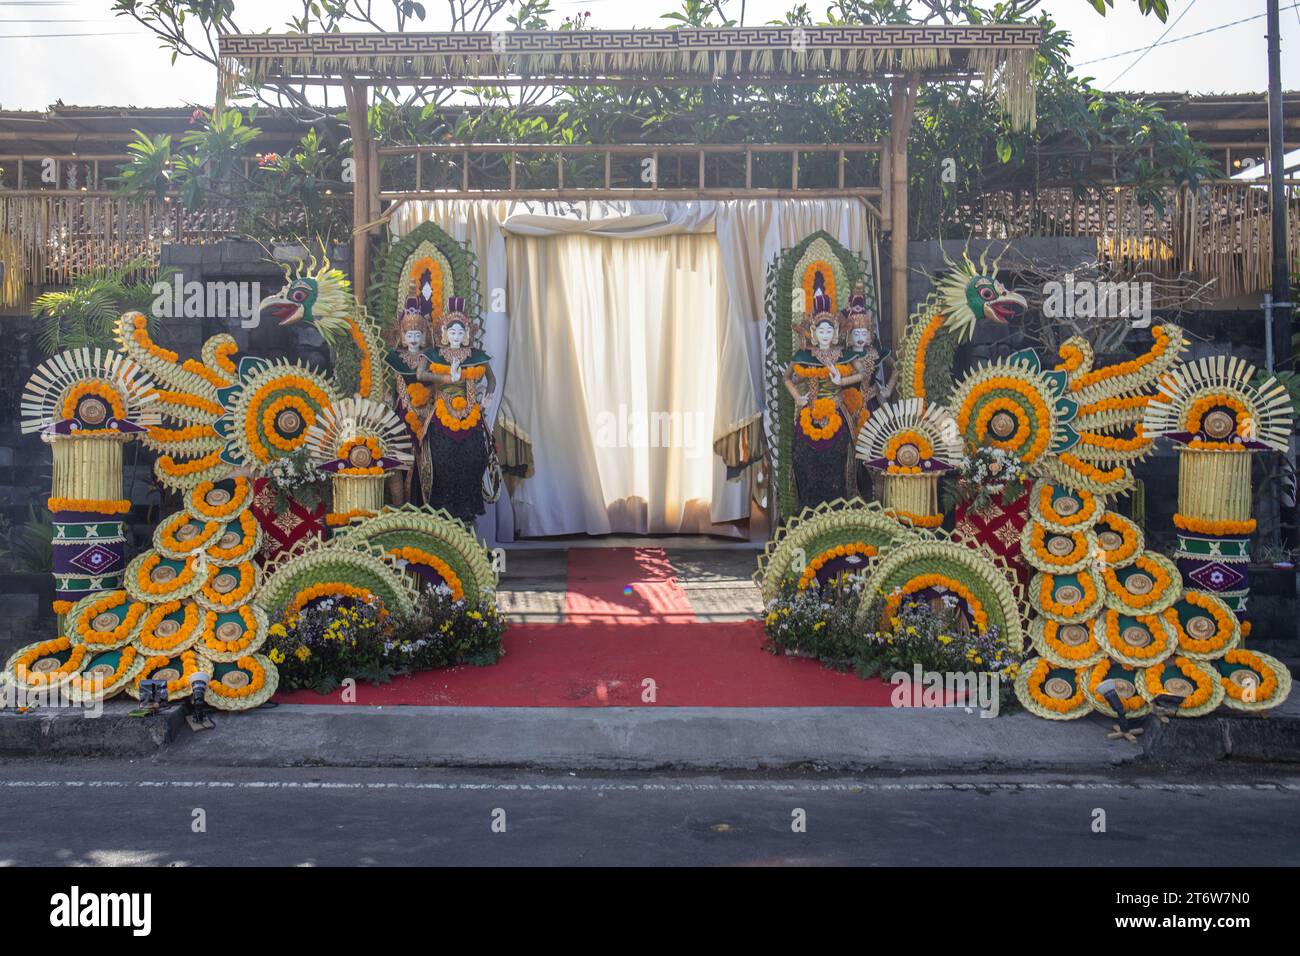 Decoration for weddings and celebrations in Bali, Indonesia Stock Photo